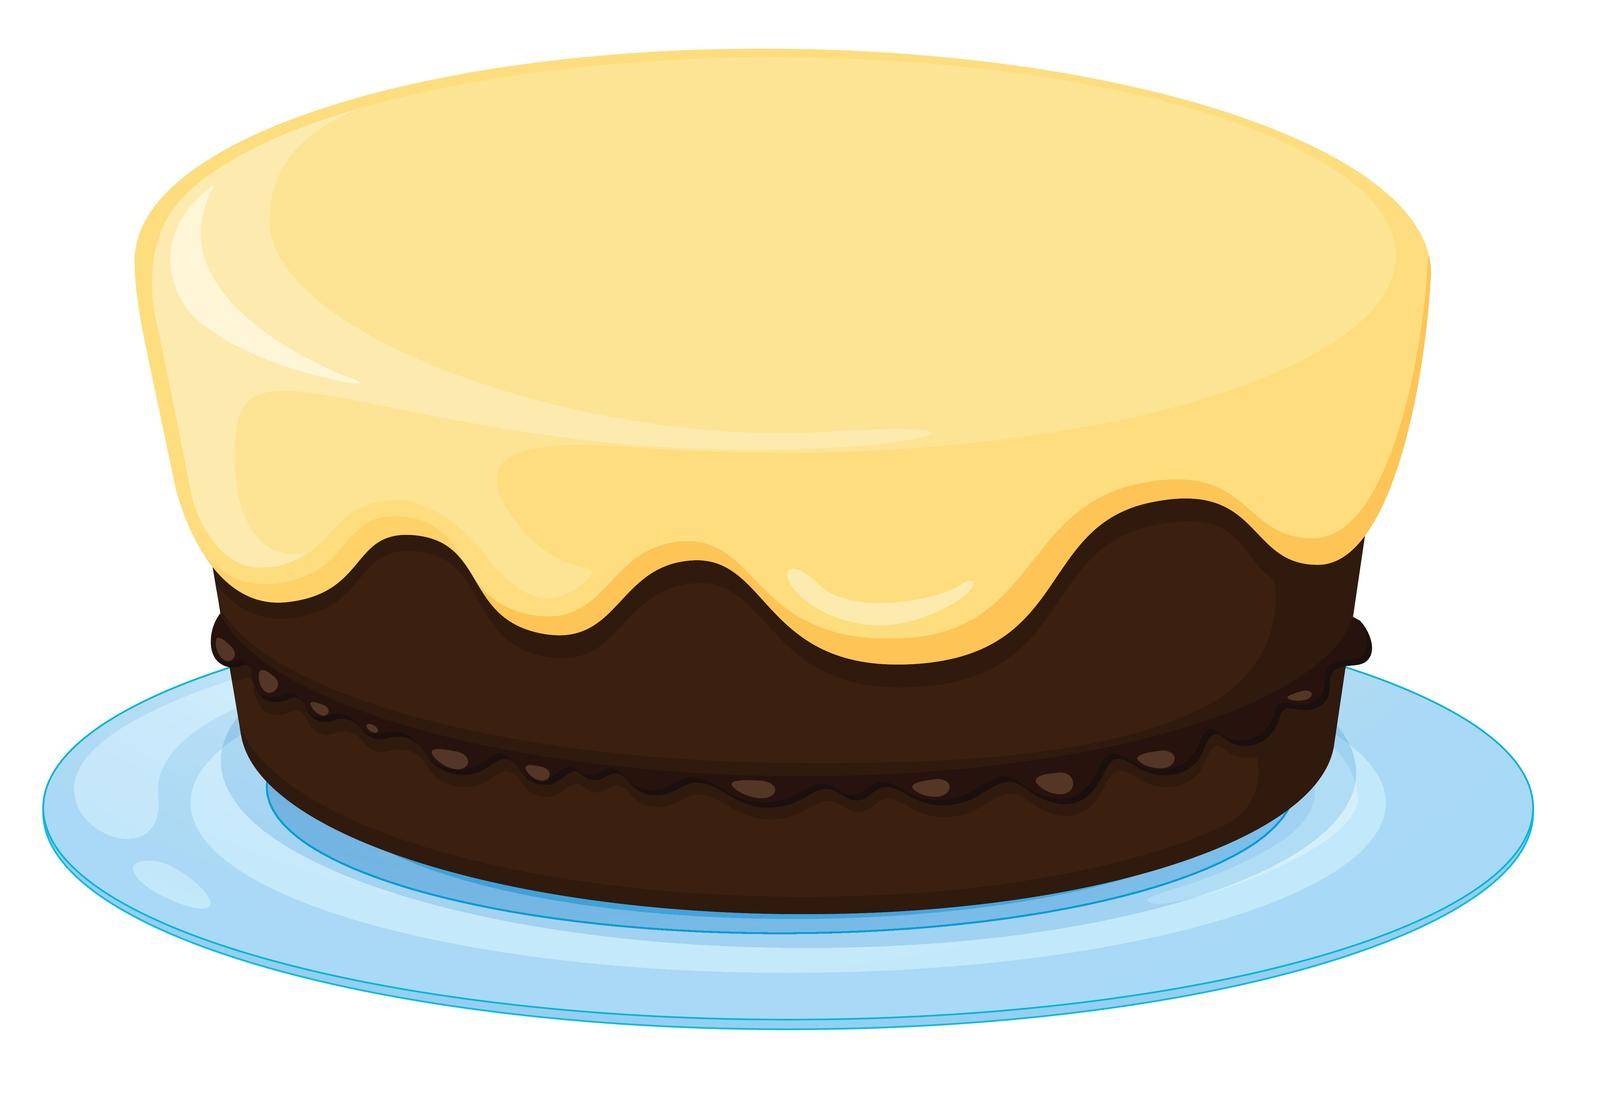 illustration of a cake on a white background